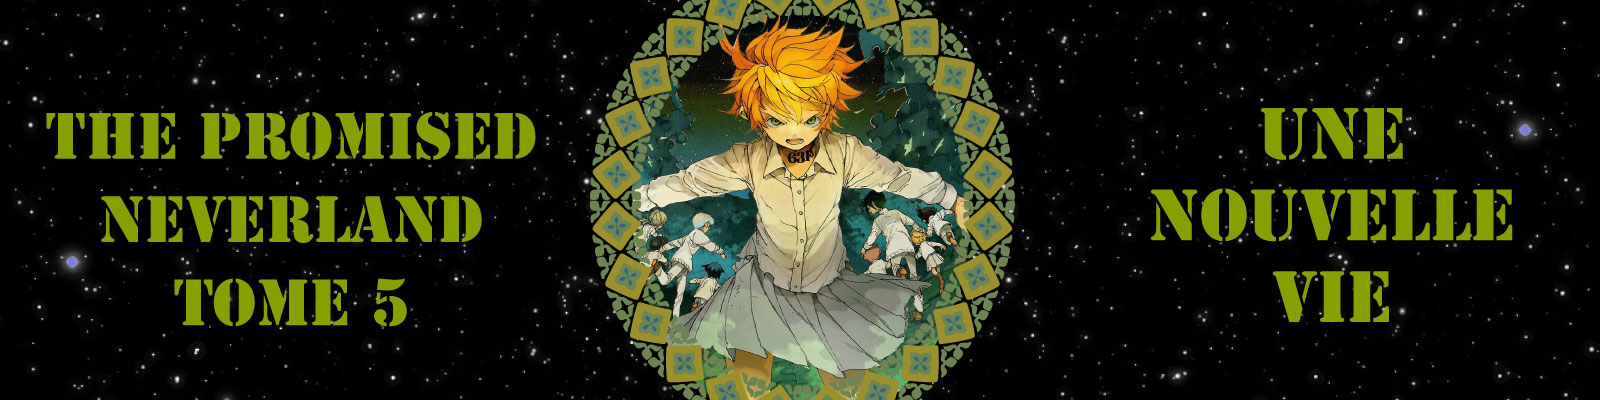 The Promised Neverland Tome 5 Une Nouvelle Vie Esprit Otaku